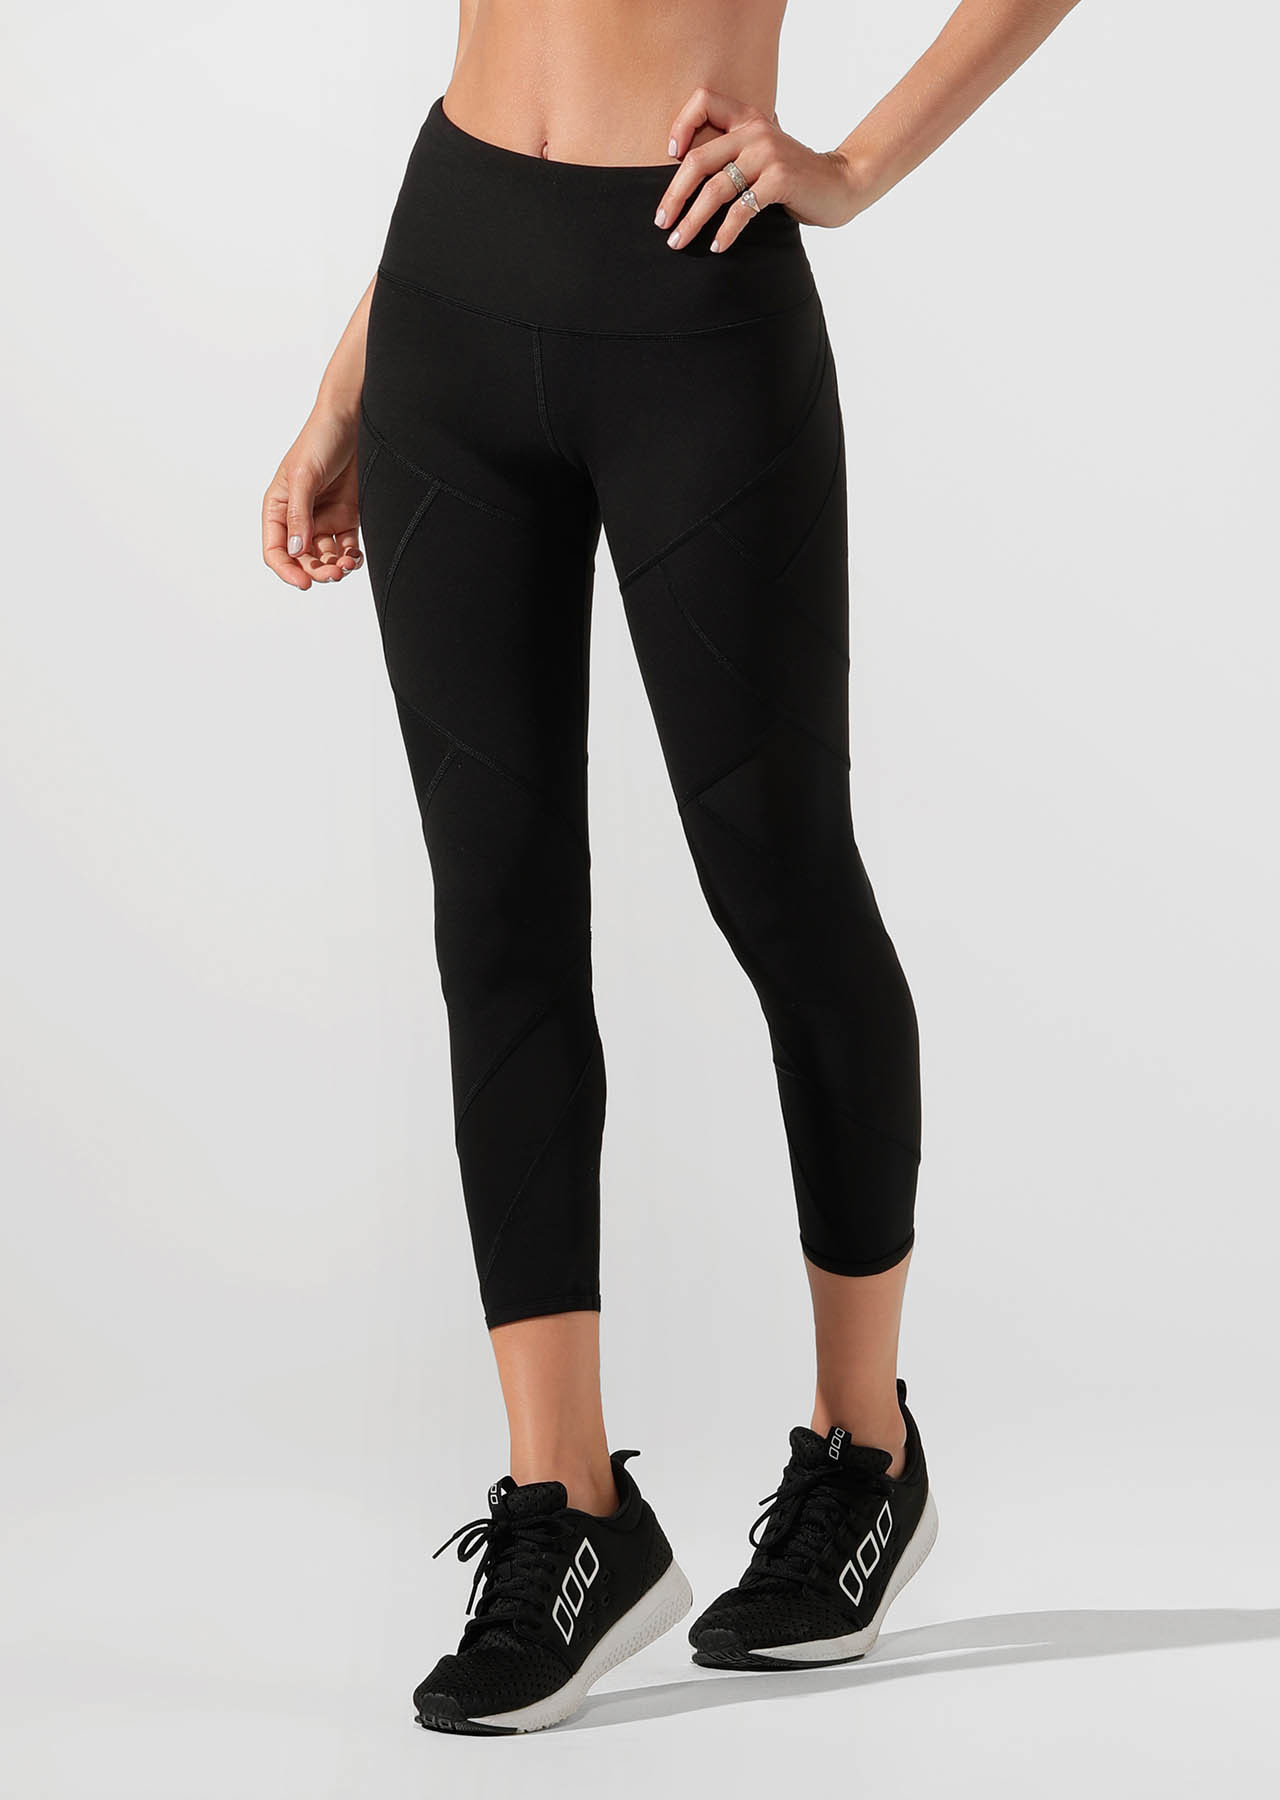 Grand Booty Support Ankle Biter Tight |Black | Lorna Jane AU